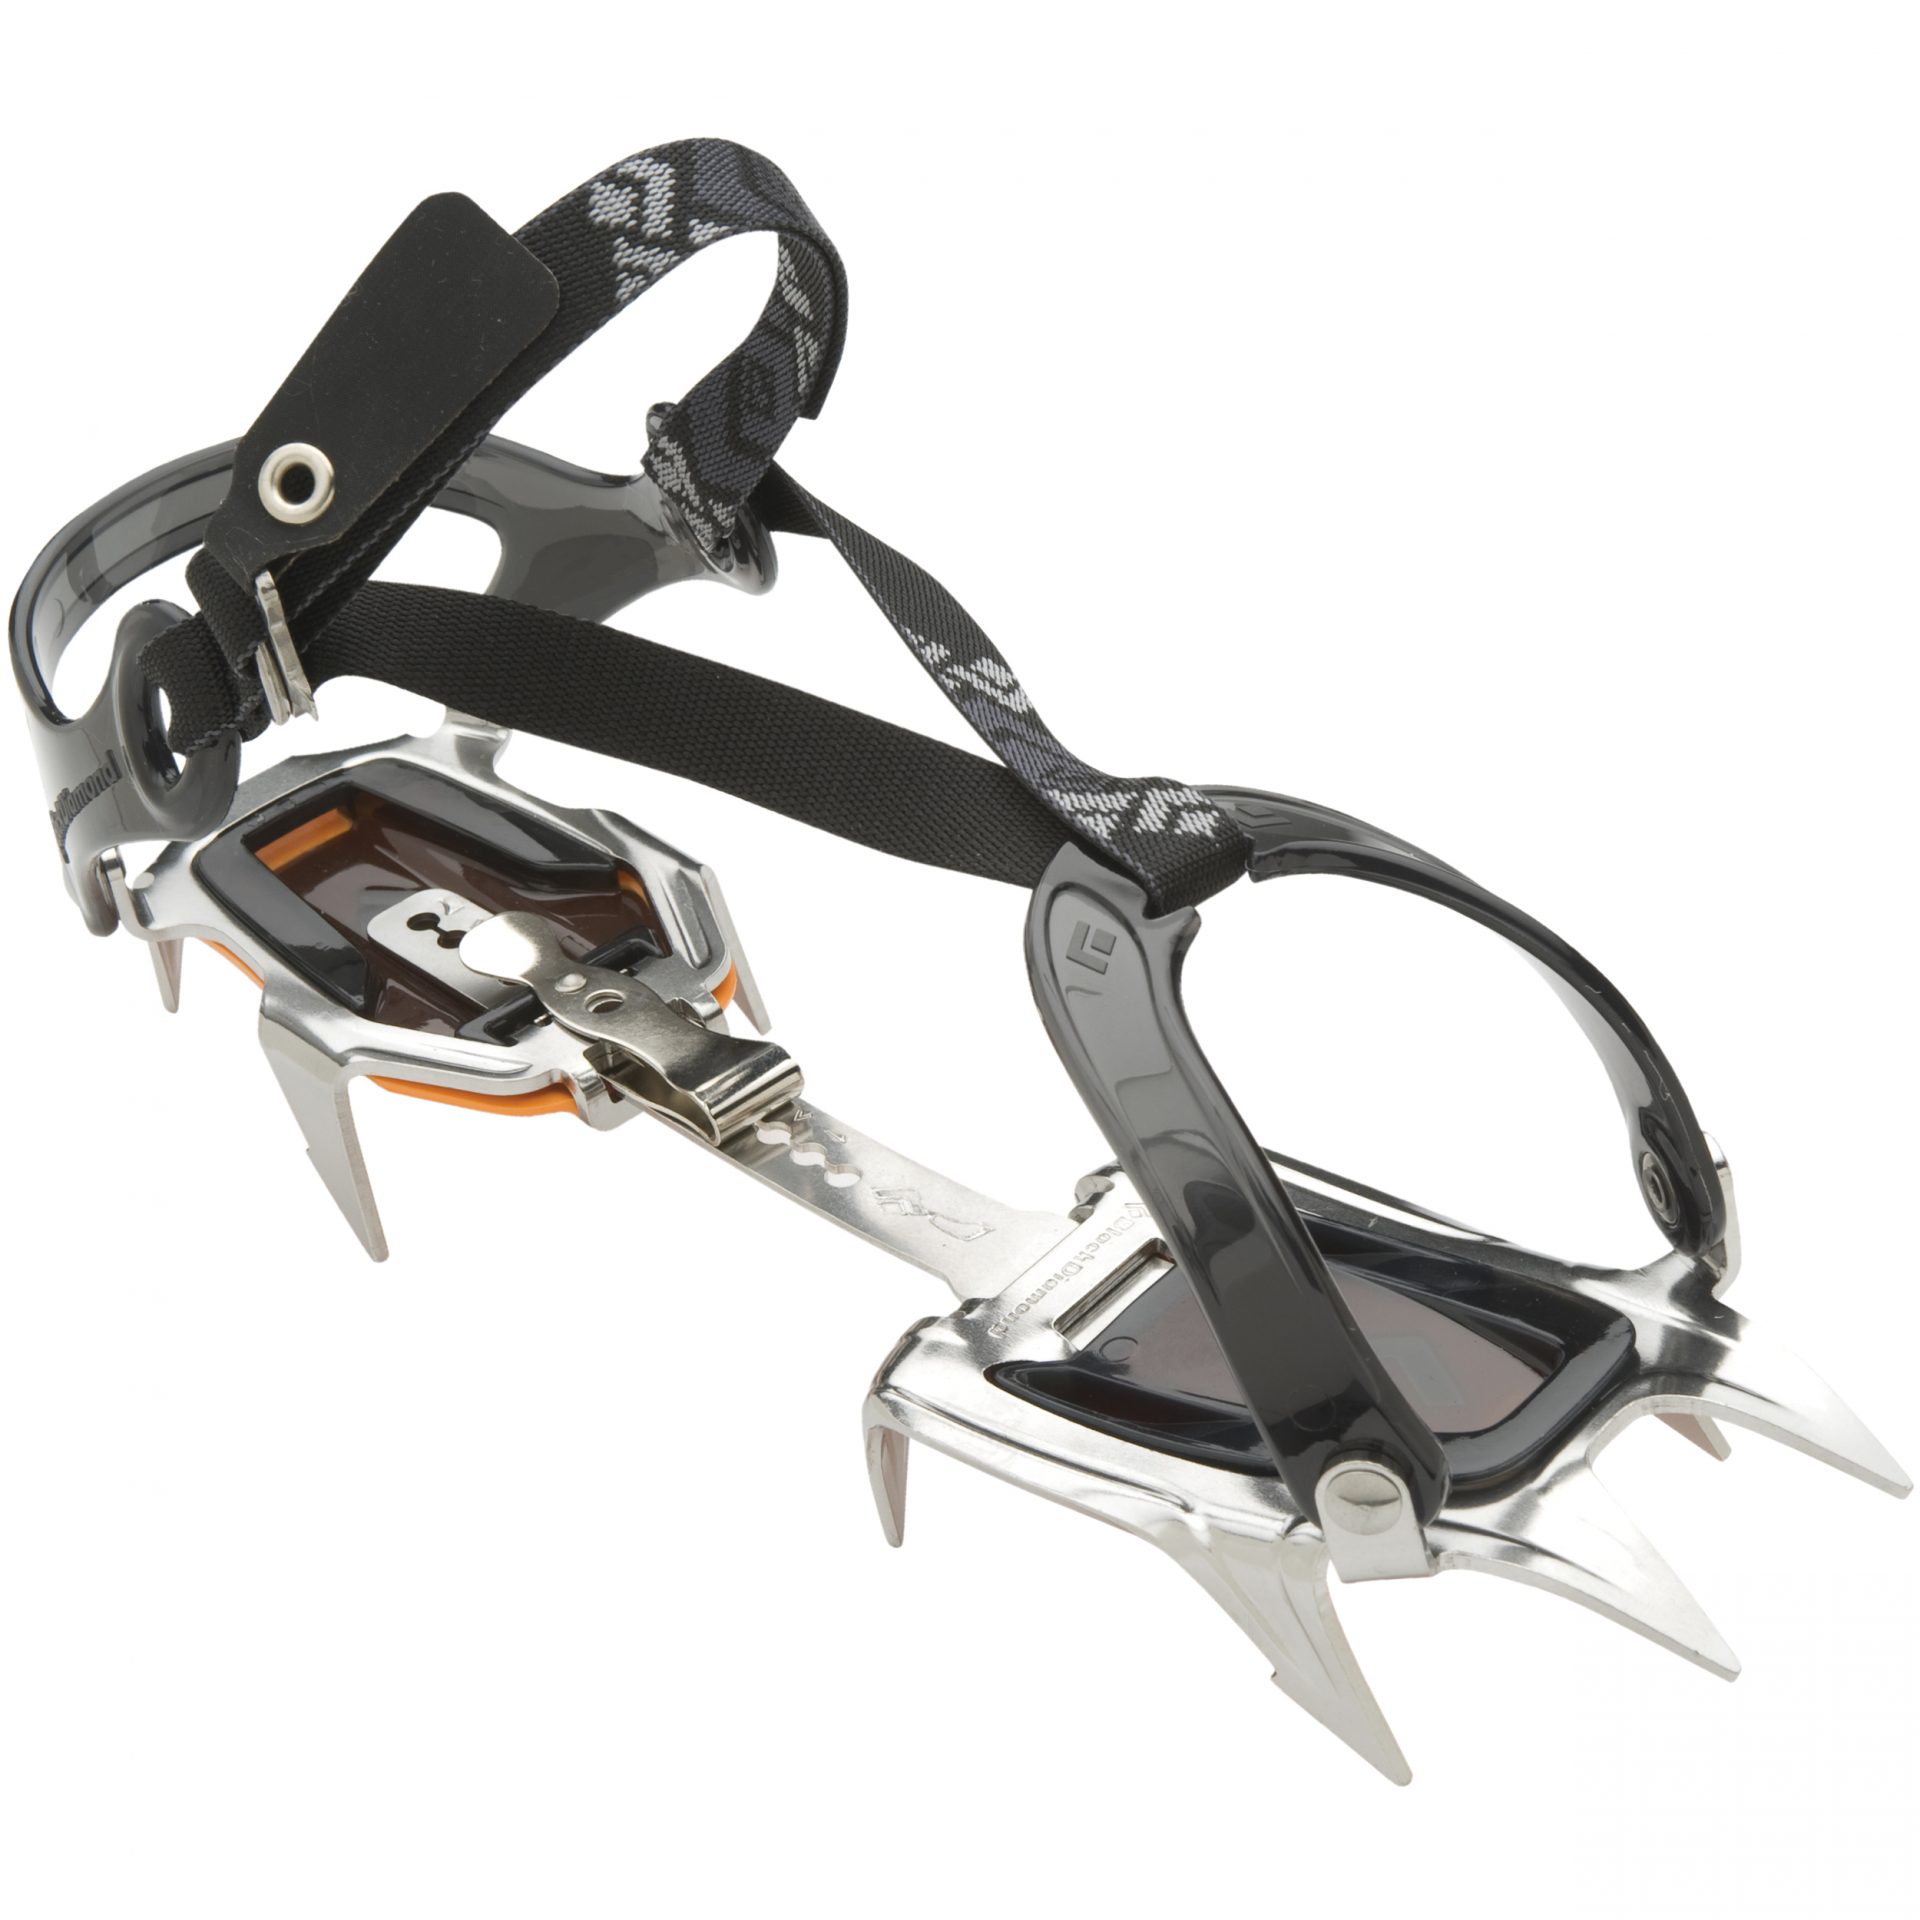 10 point crampons